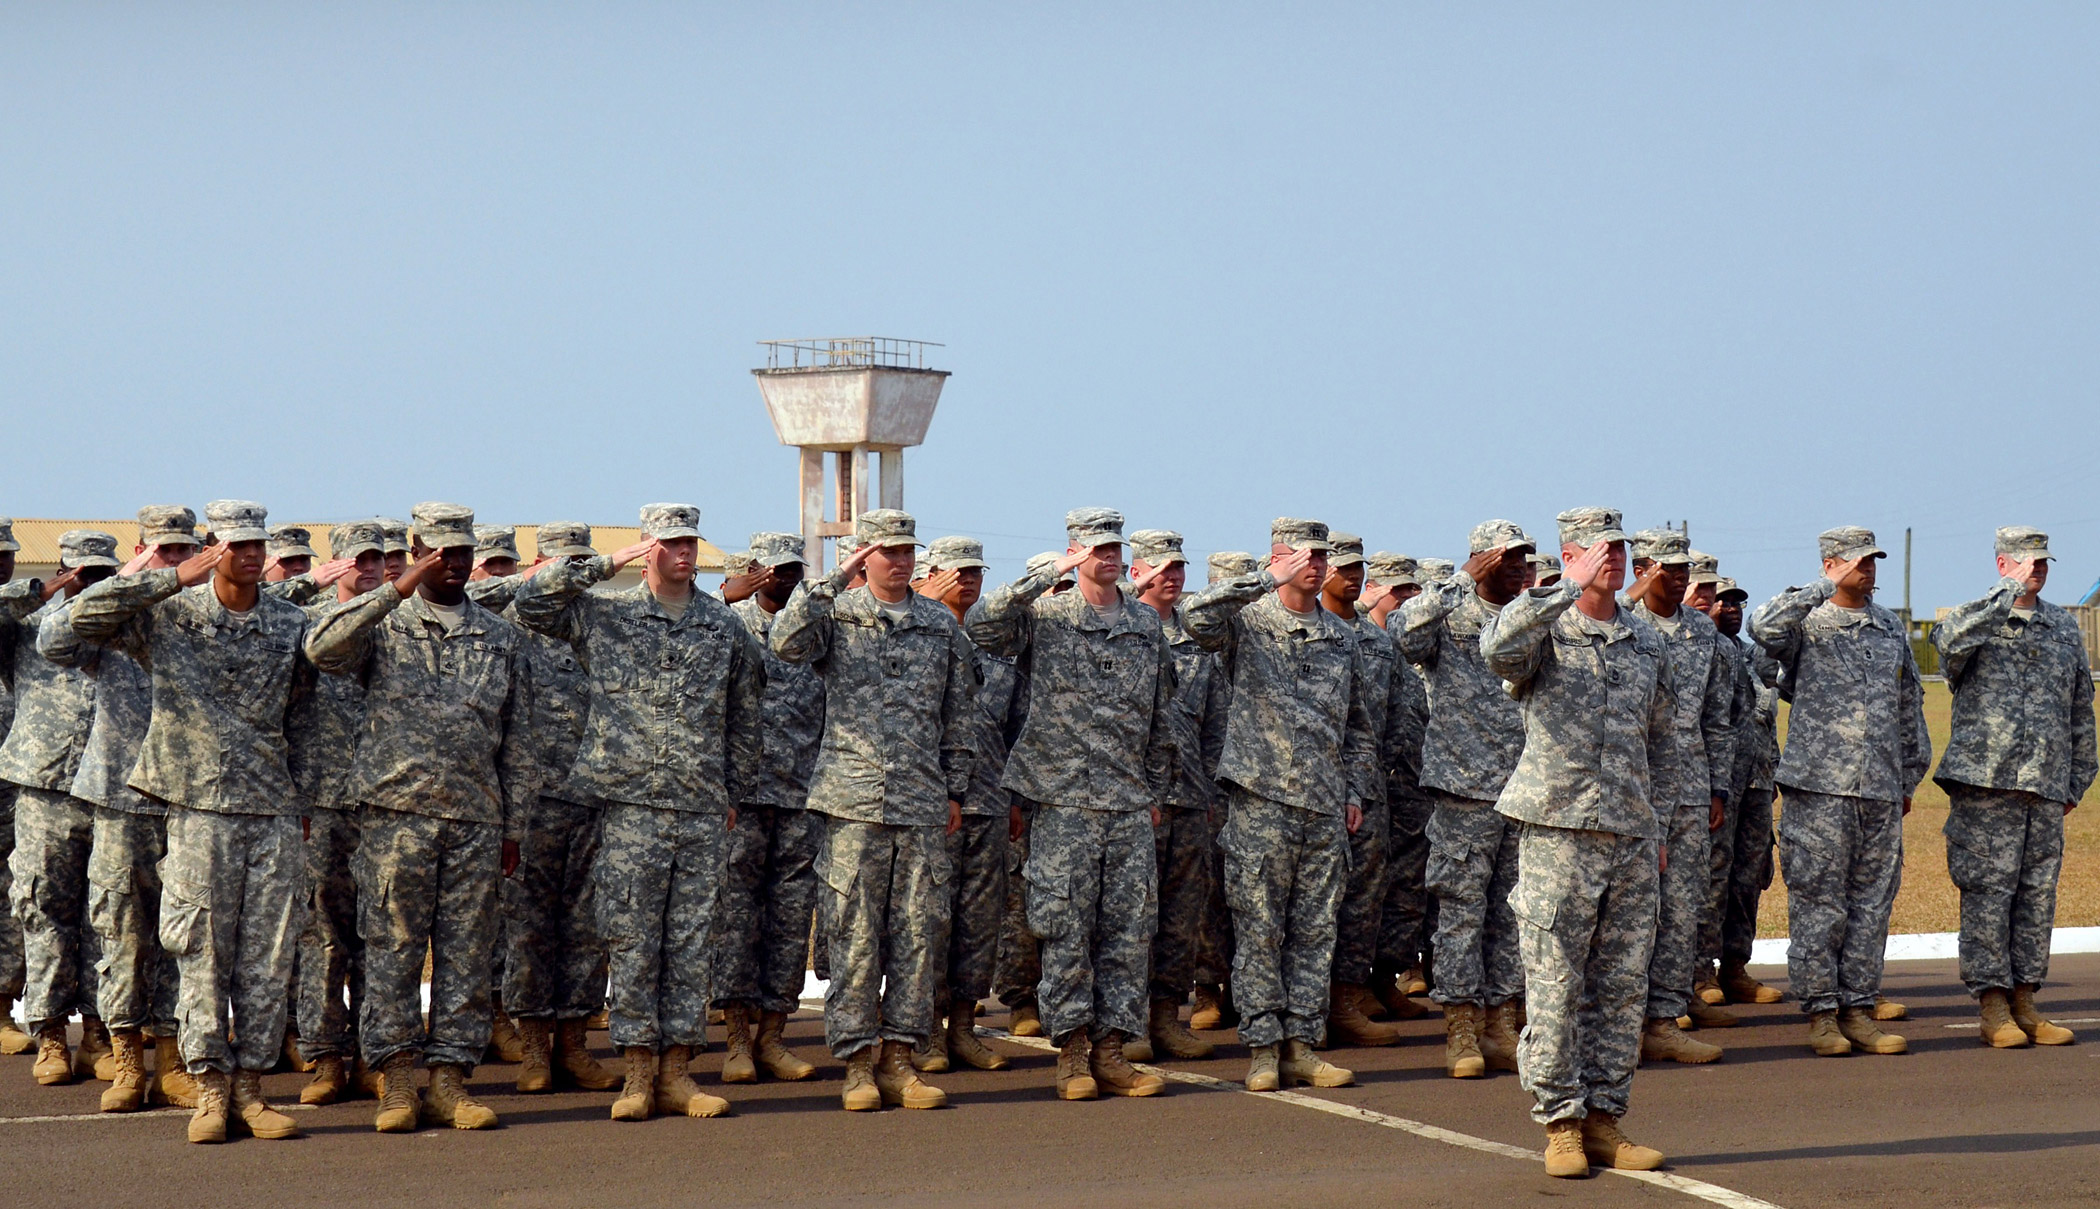 US soldiers of the 101st Airborne Division salute during the ceremonial folding and stowing of the flag at the Barclay Training Camp in Monrovia on Feb. 26, 2015, marking the end of the "Joint Forces Command United Assistance" mission. (Zoom Dosso—AFP/Getty Images)